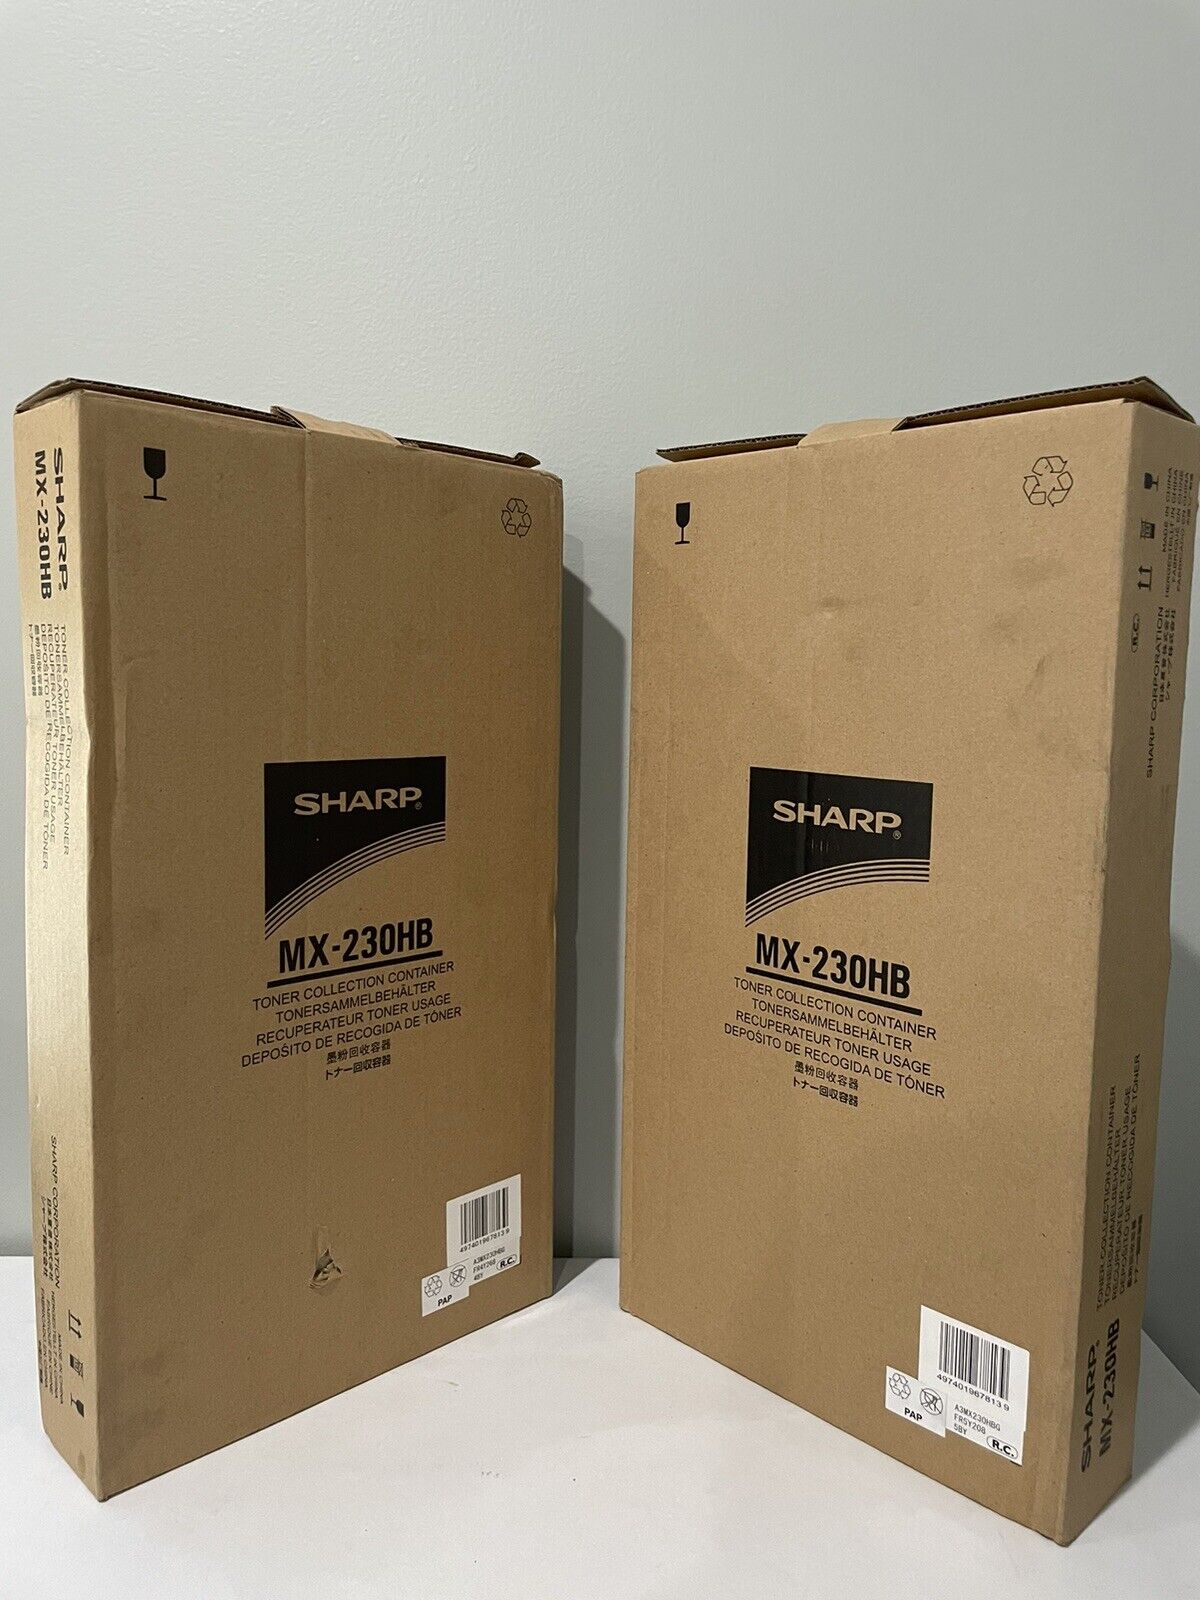 Lot of 2 Genuine Sharp MX-230HB Waste Toner Containers For MX-2310U, MX-3640N